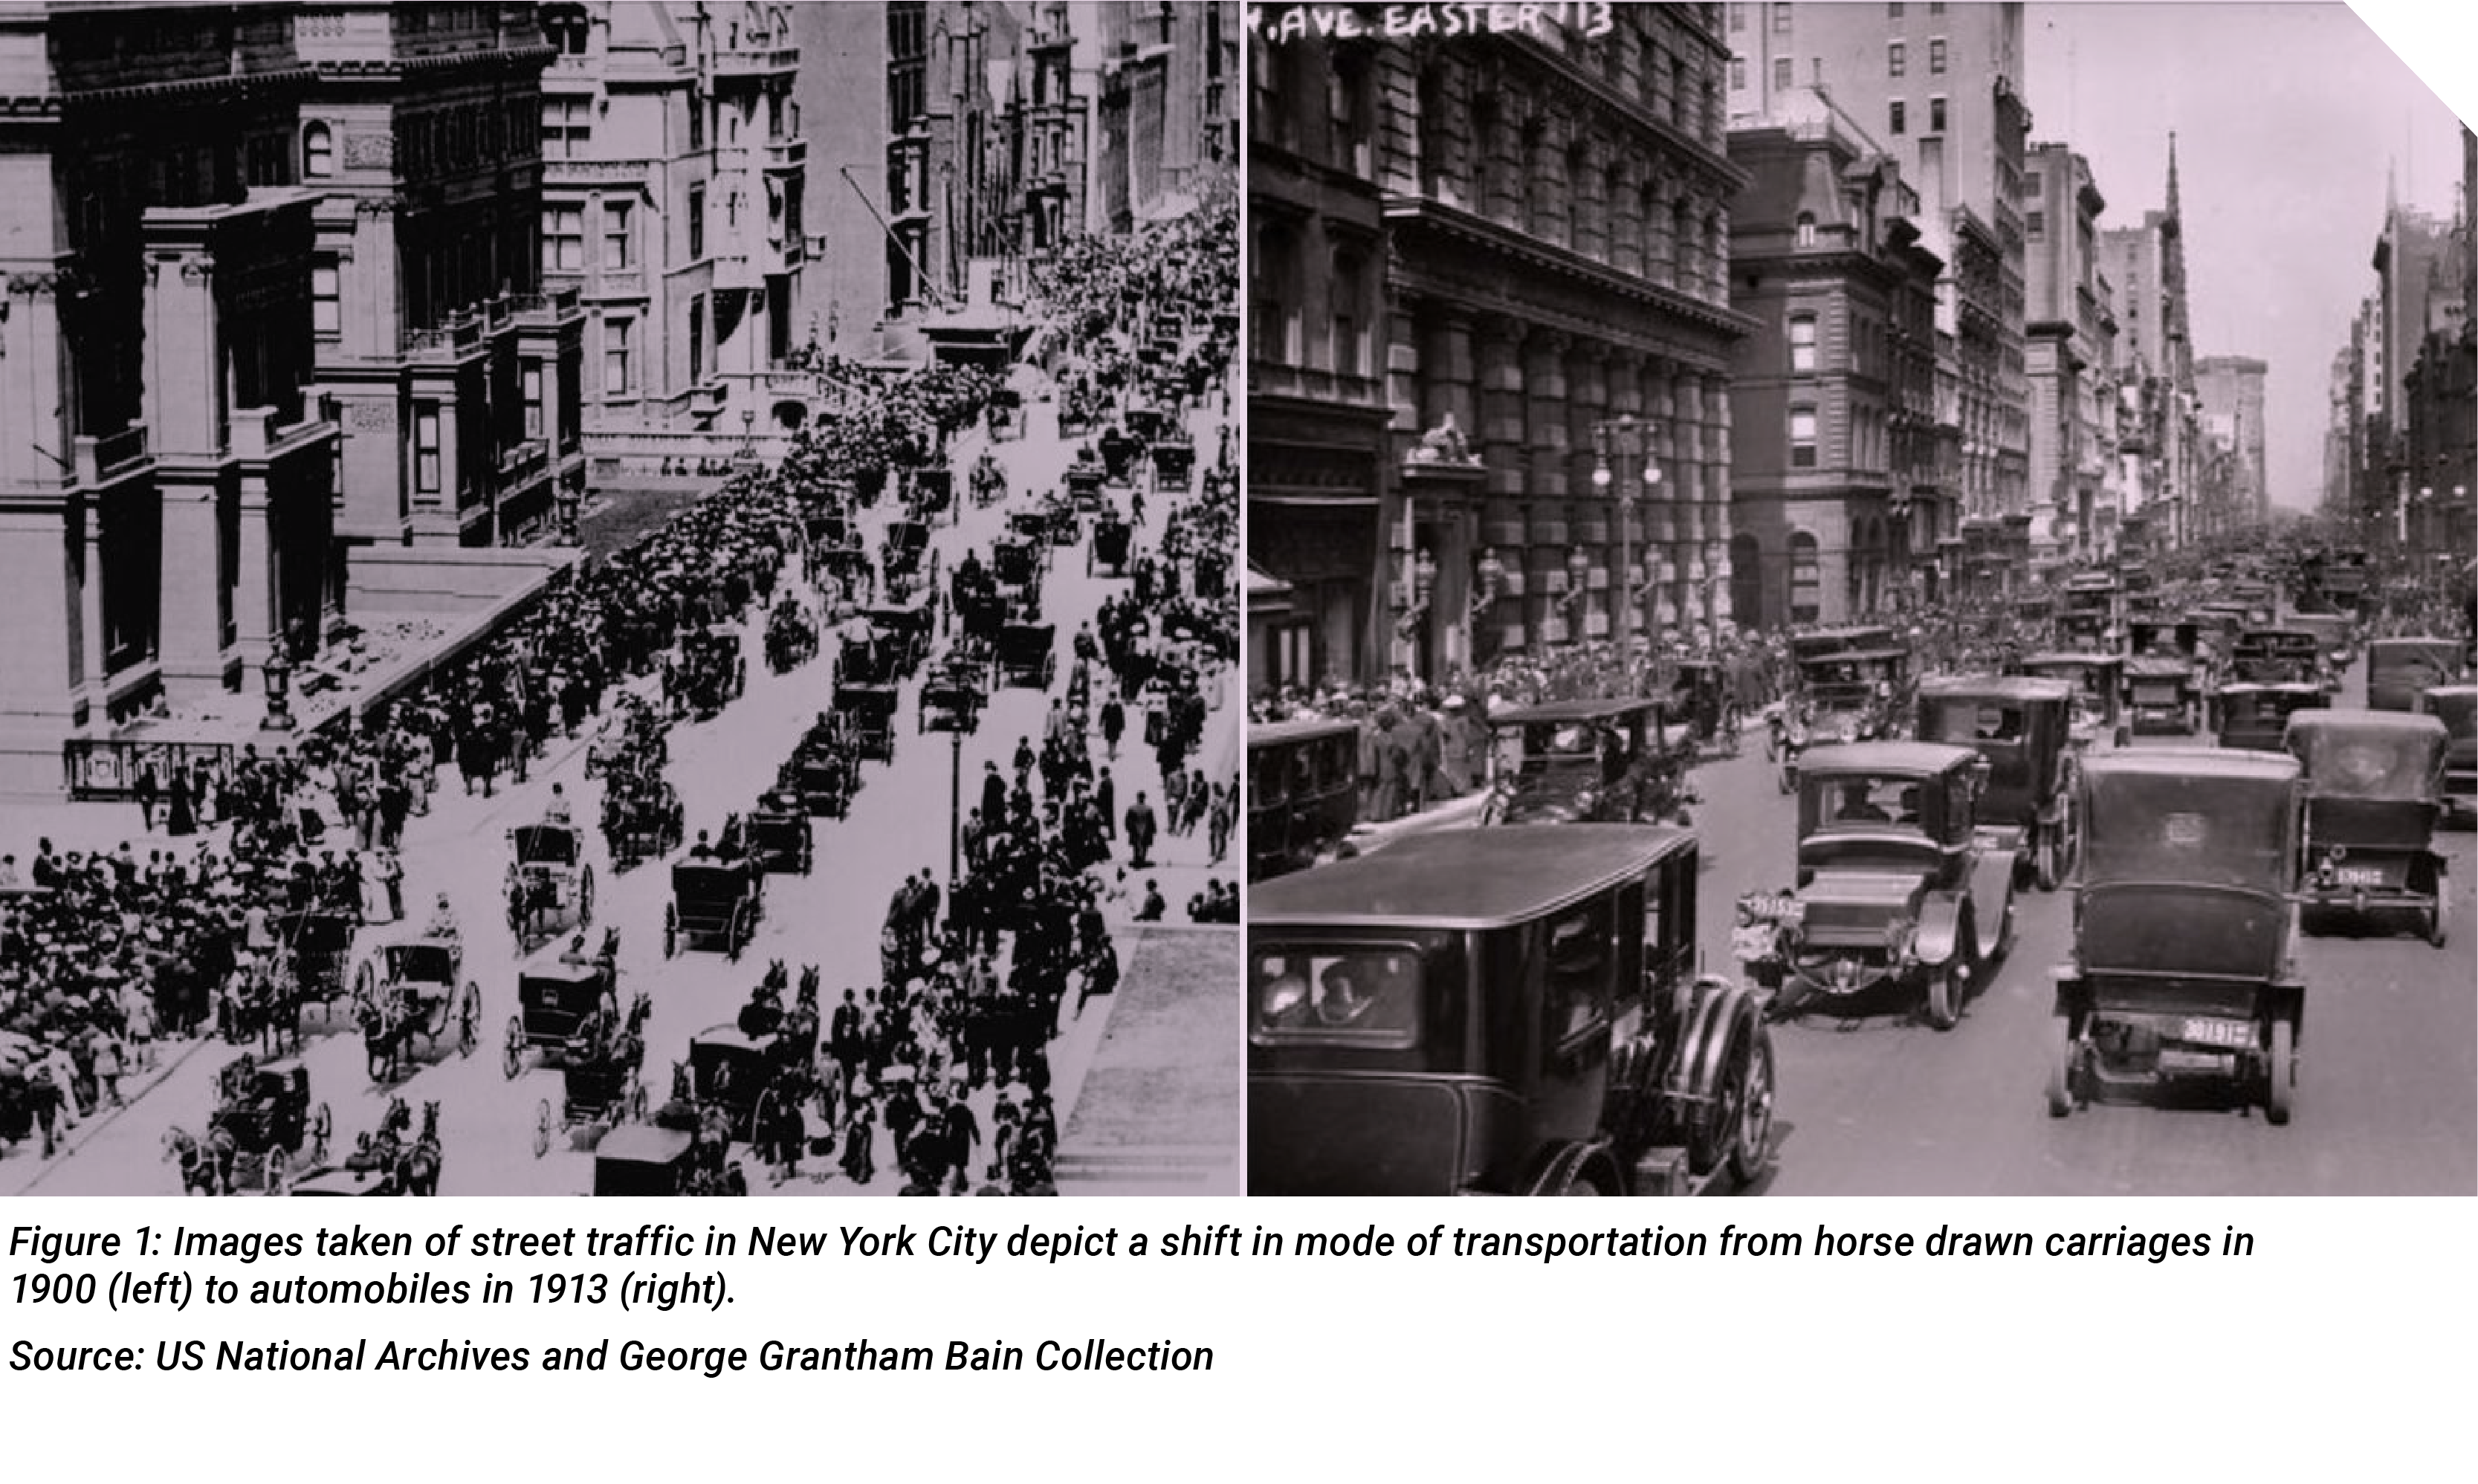 Images taken of street traffic in New York City depict a shift in mode of transportation from horse drawn carriages in 1900 (left) to automobiles in 1913 (right).